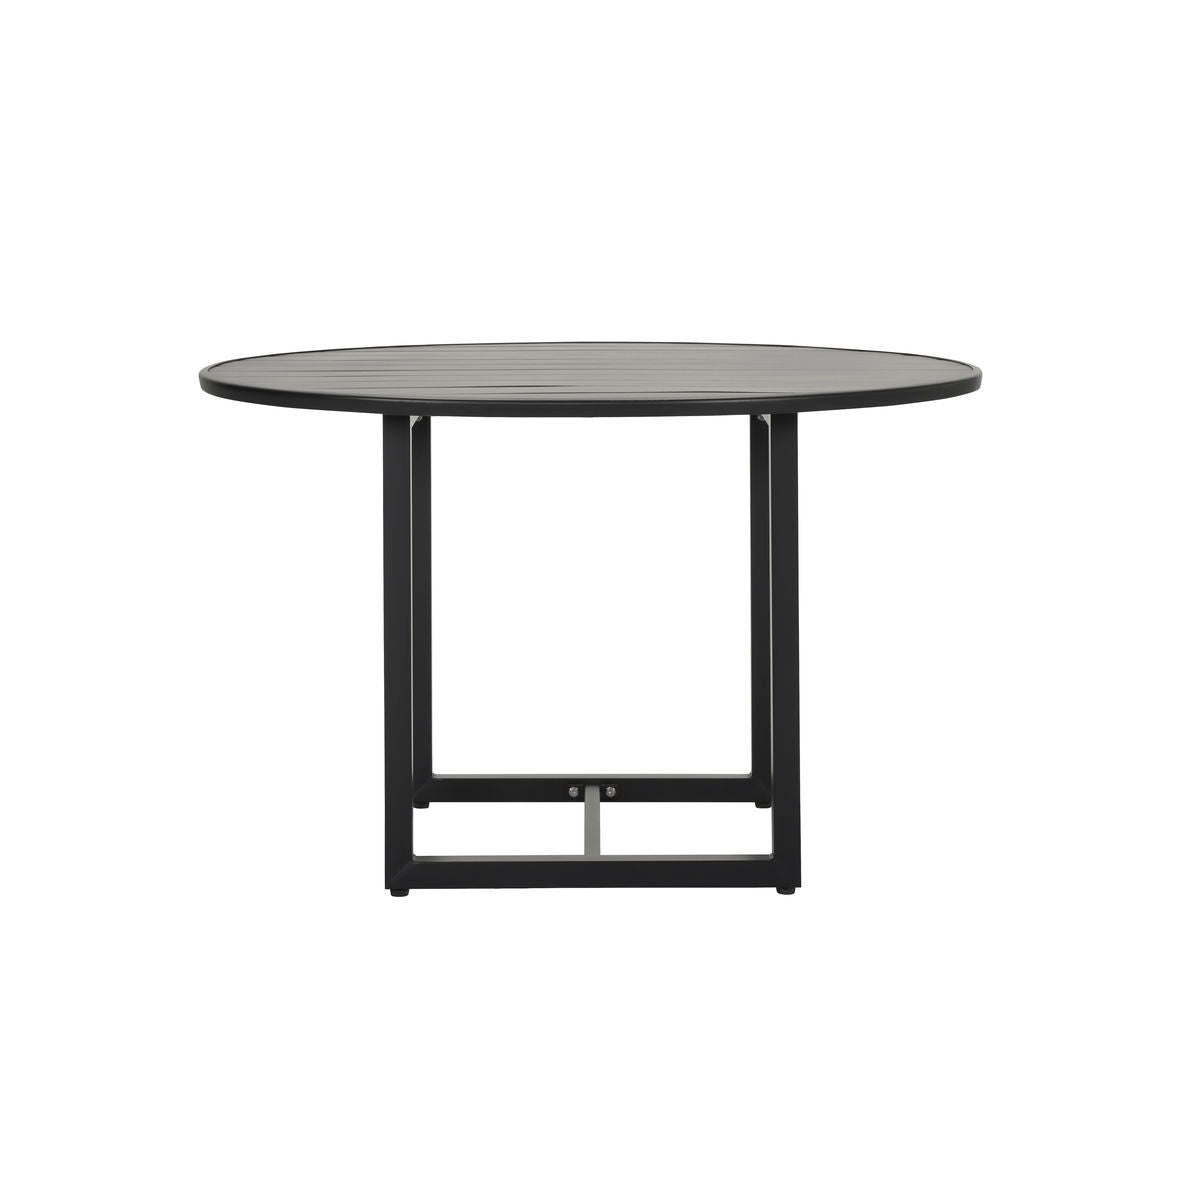 House Doctor Table, Hdhelo, sort